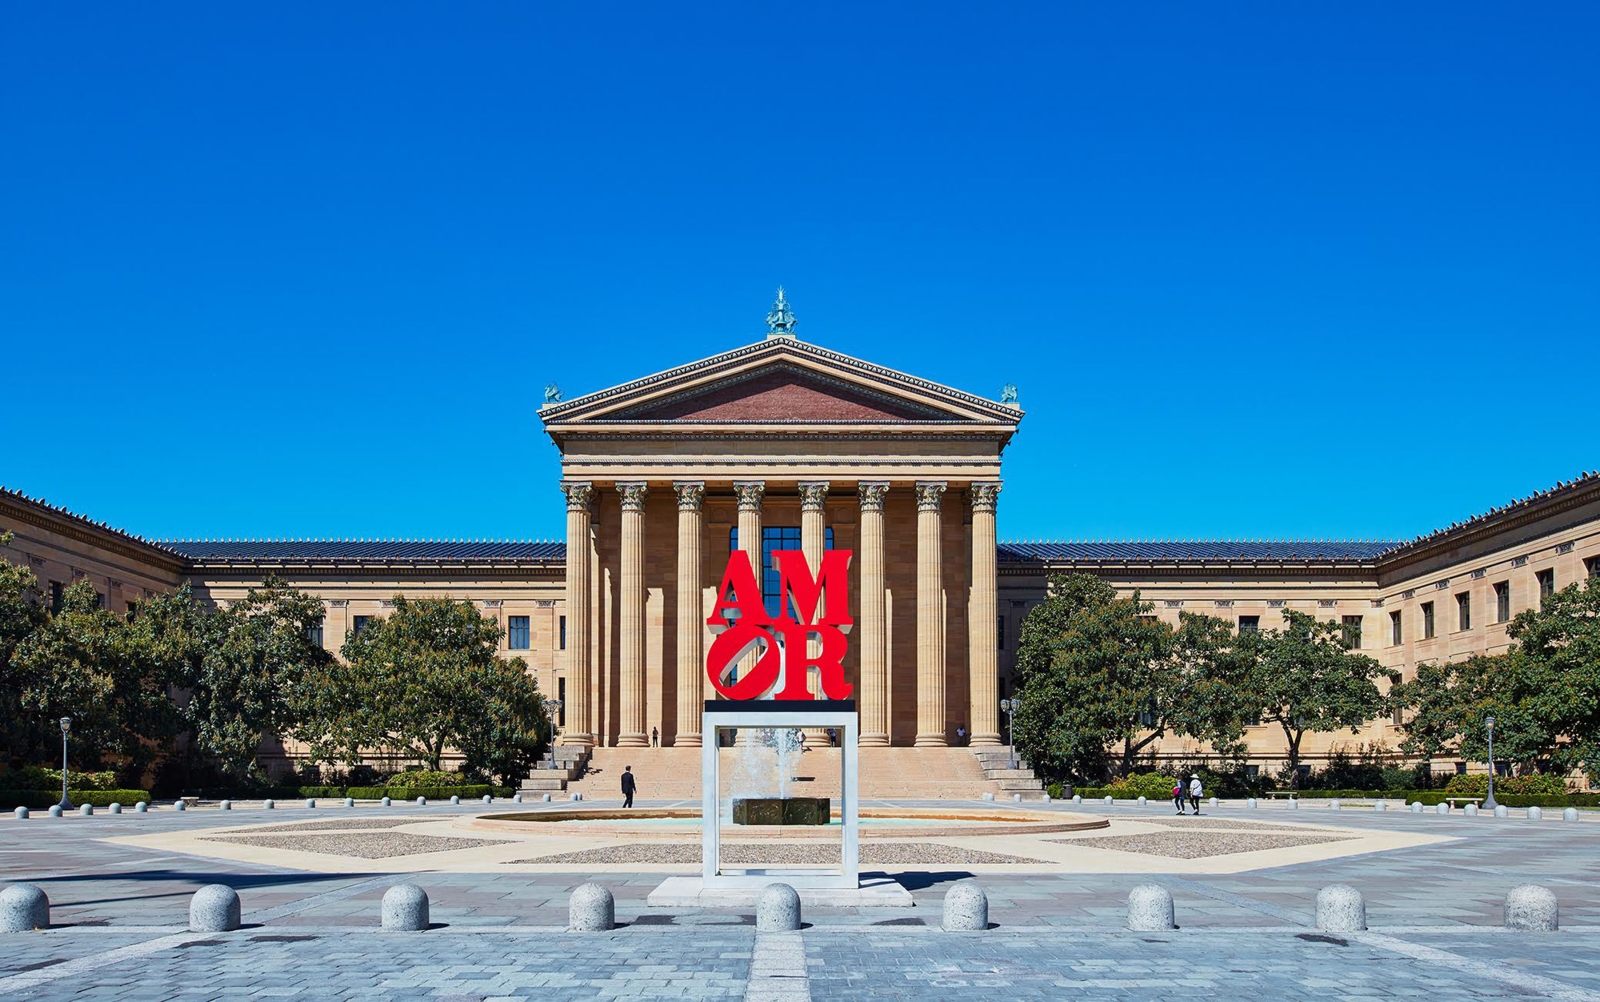 Indiana&rsquo;s sculpture AMOR (1998) installed outside the Philadelphia Museum of Art in September 2015, on the occasion of the visit of Pope Francis I to Philadelphia. Photo: Courtesy of Tom Powel Imaging